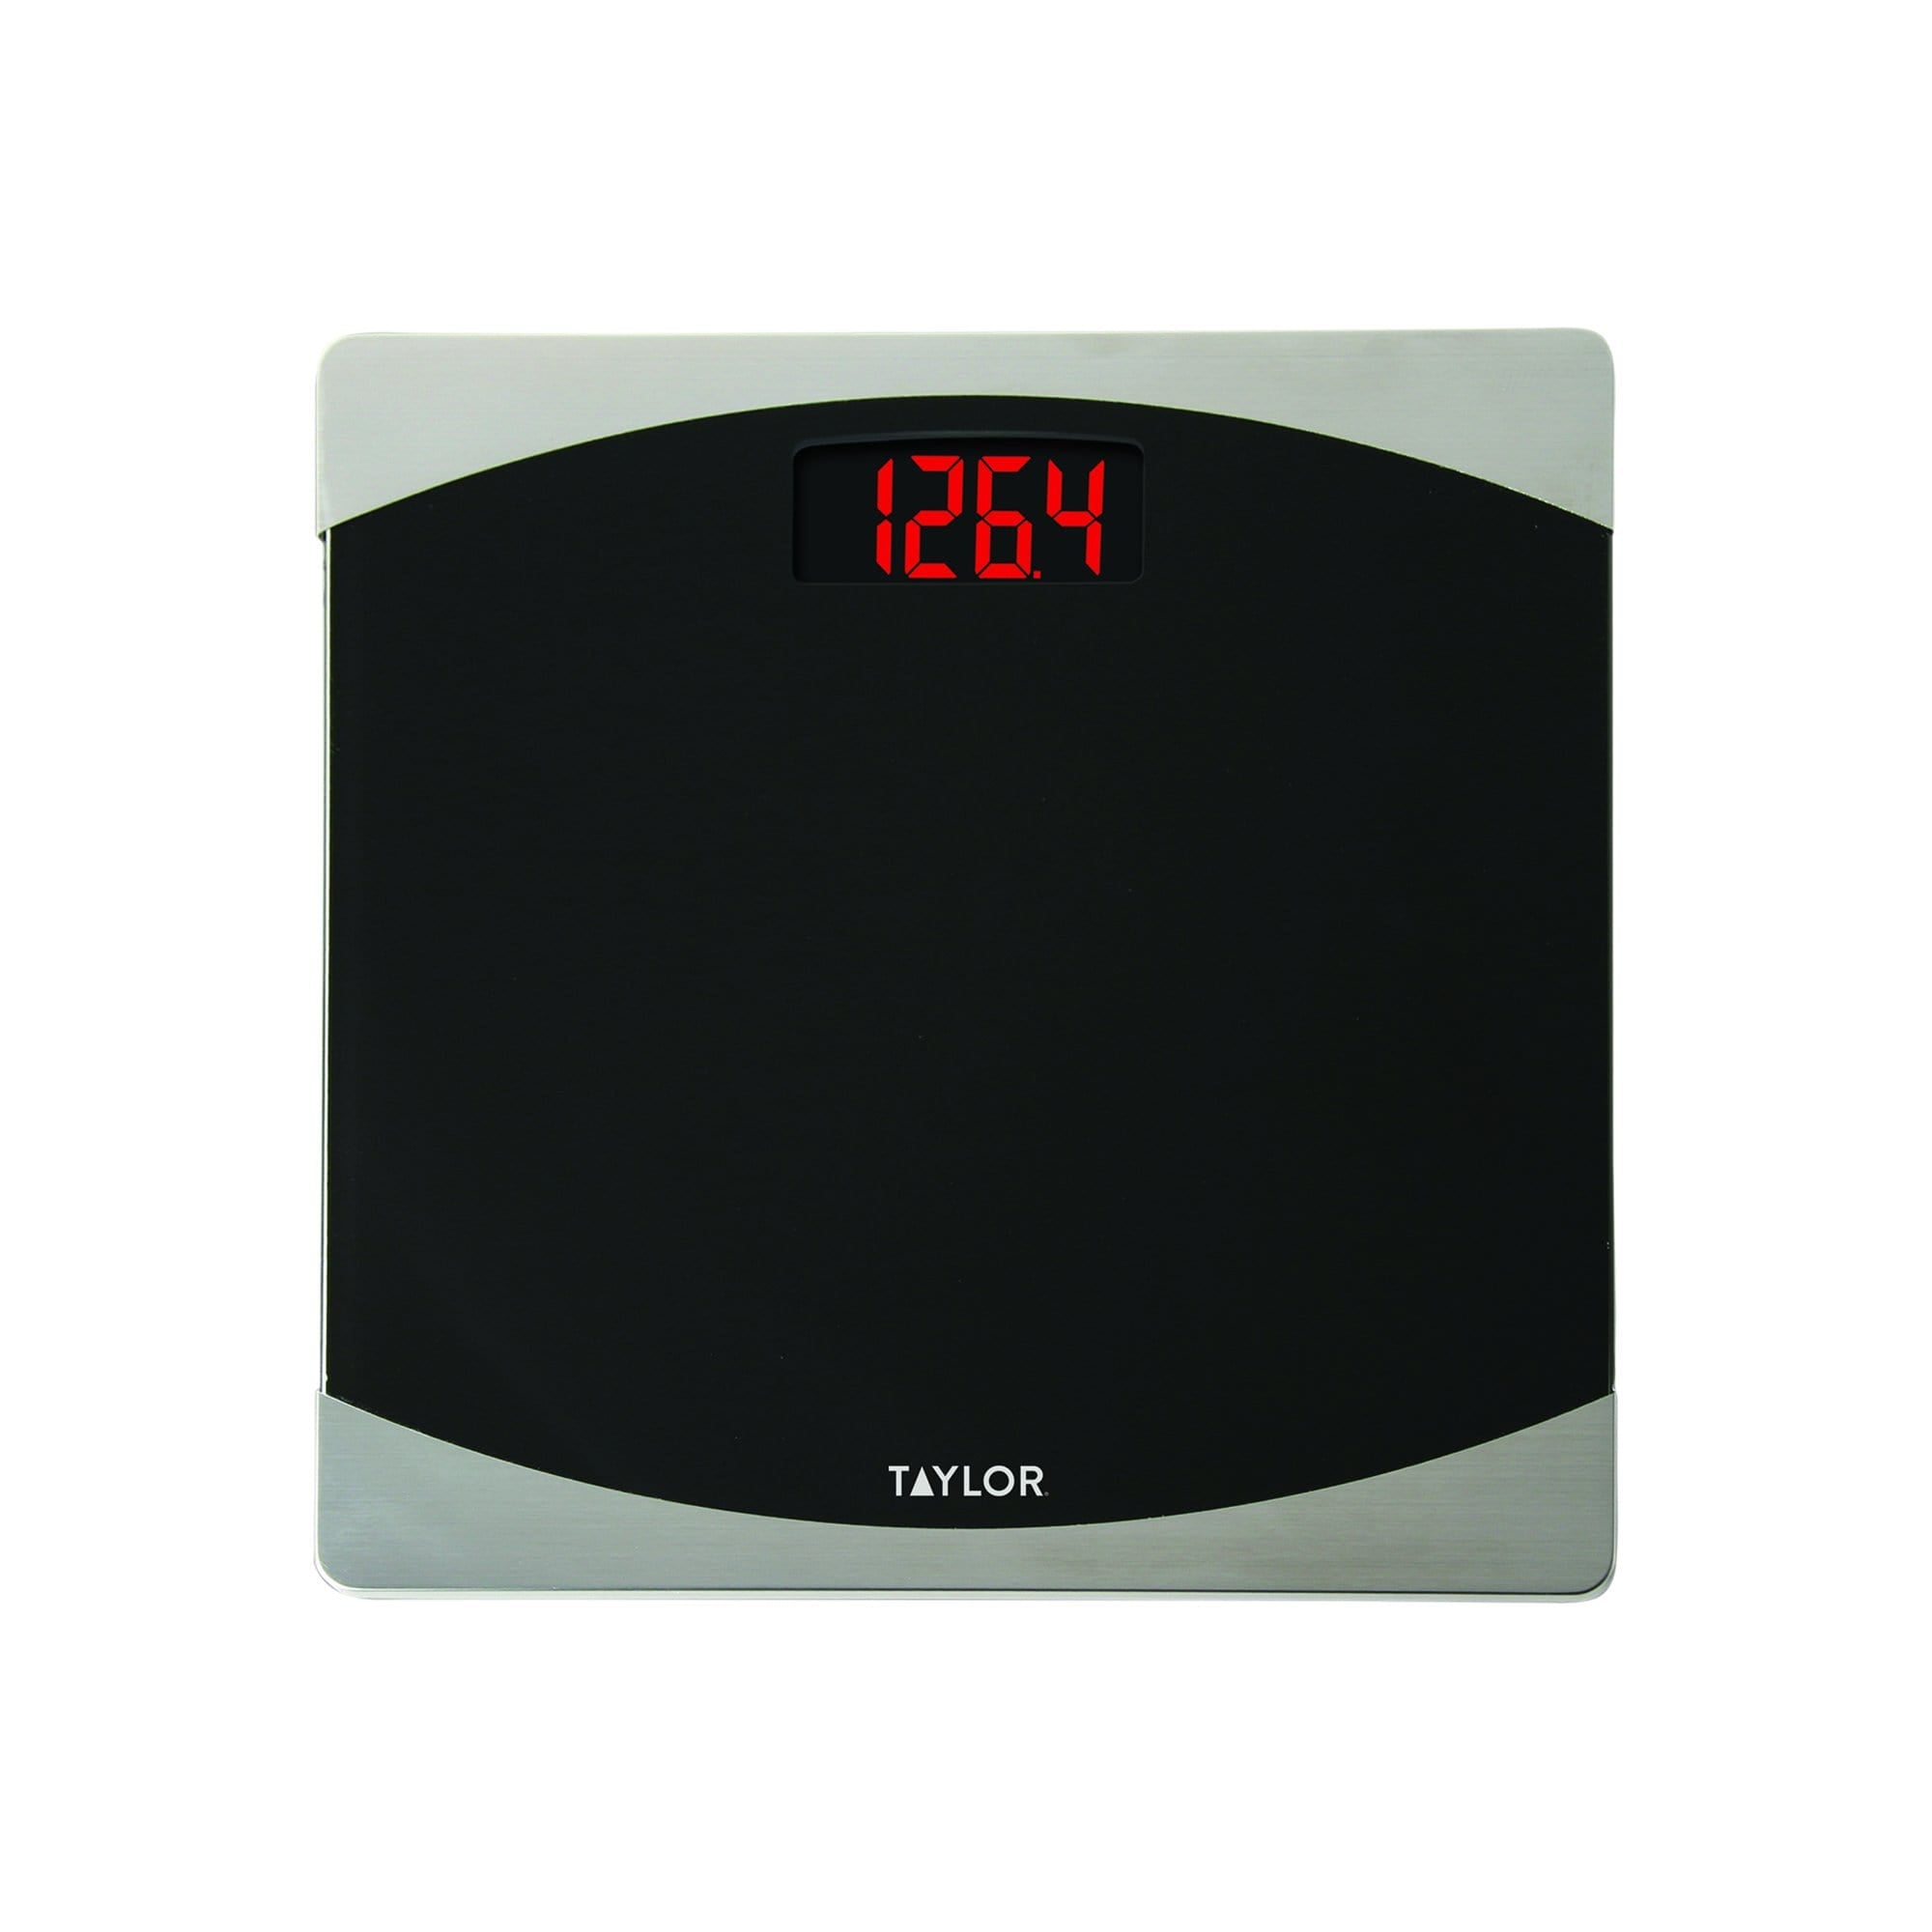 Digital Glass Bathroom Scale with Red LCD Display, 7562